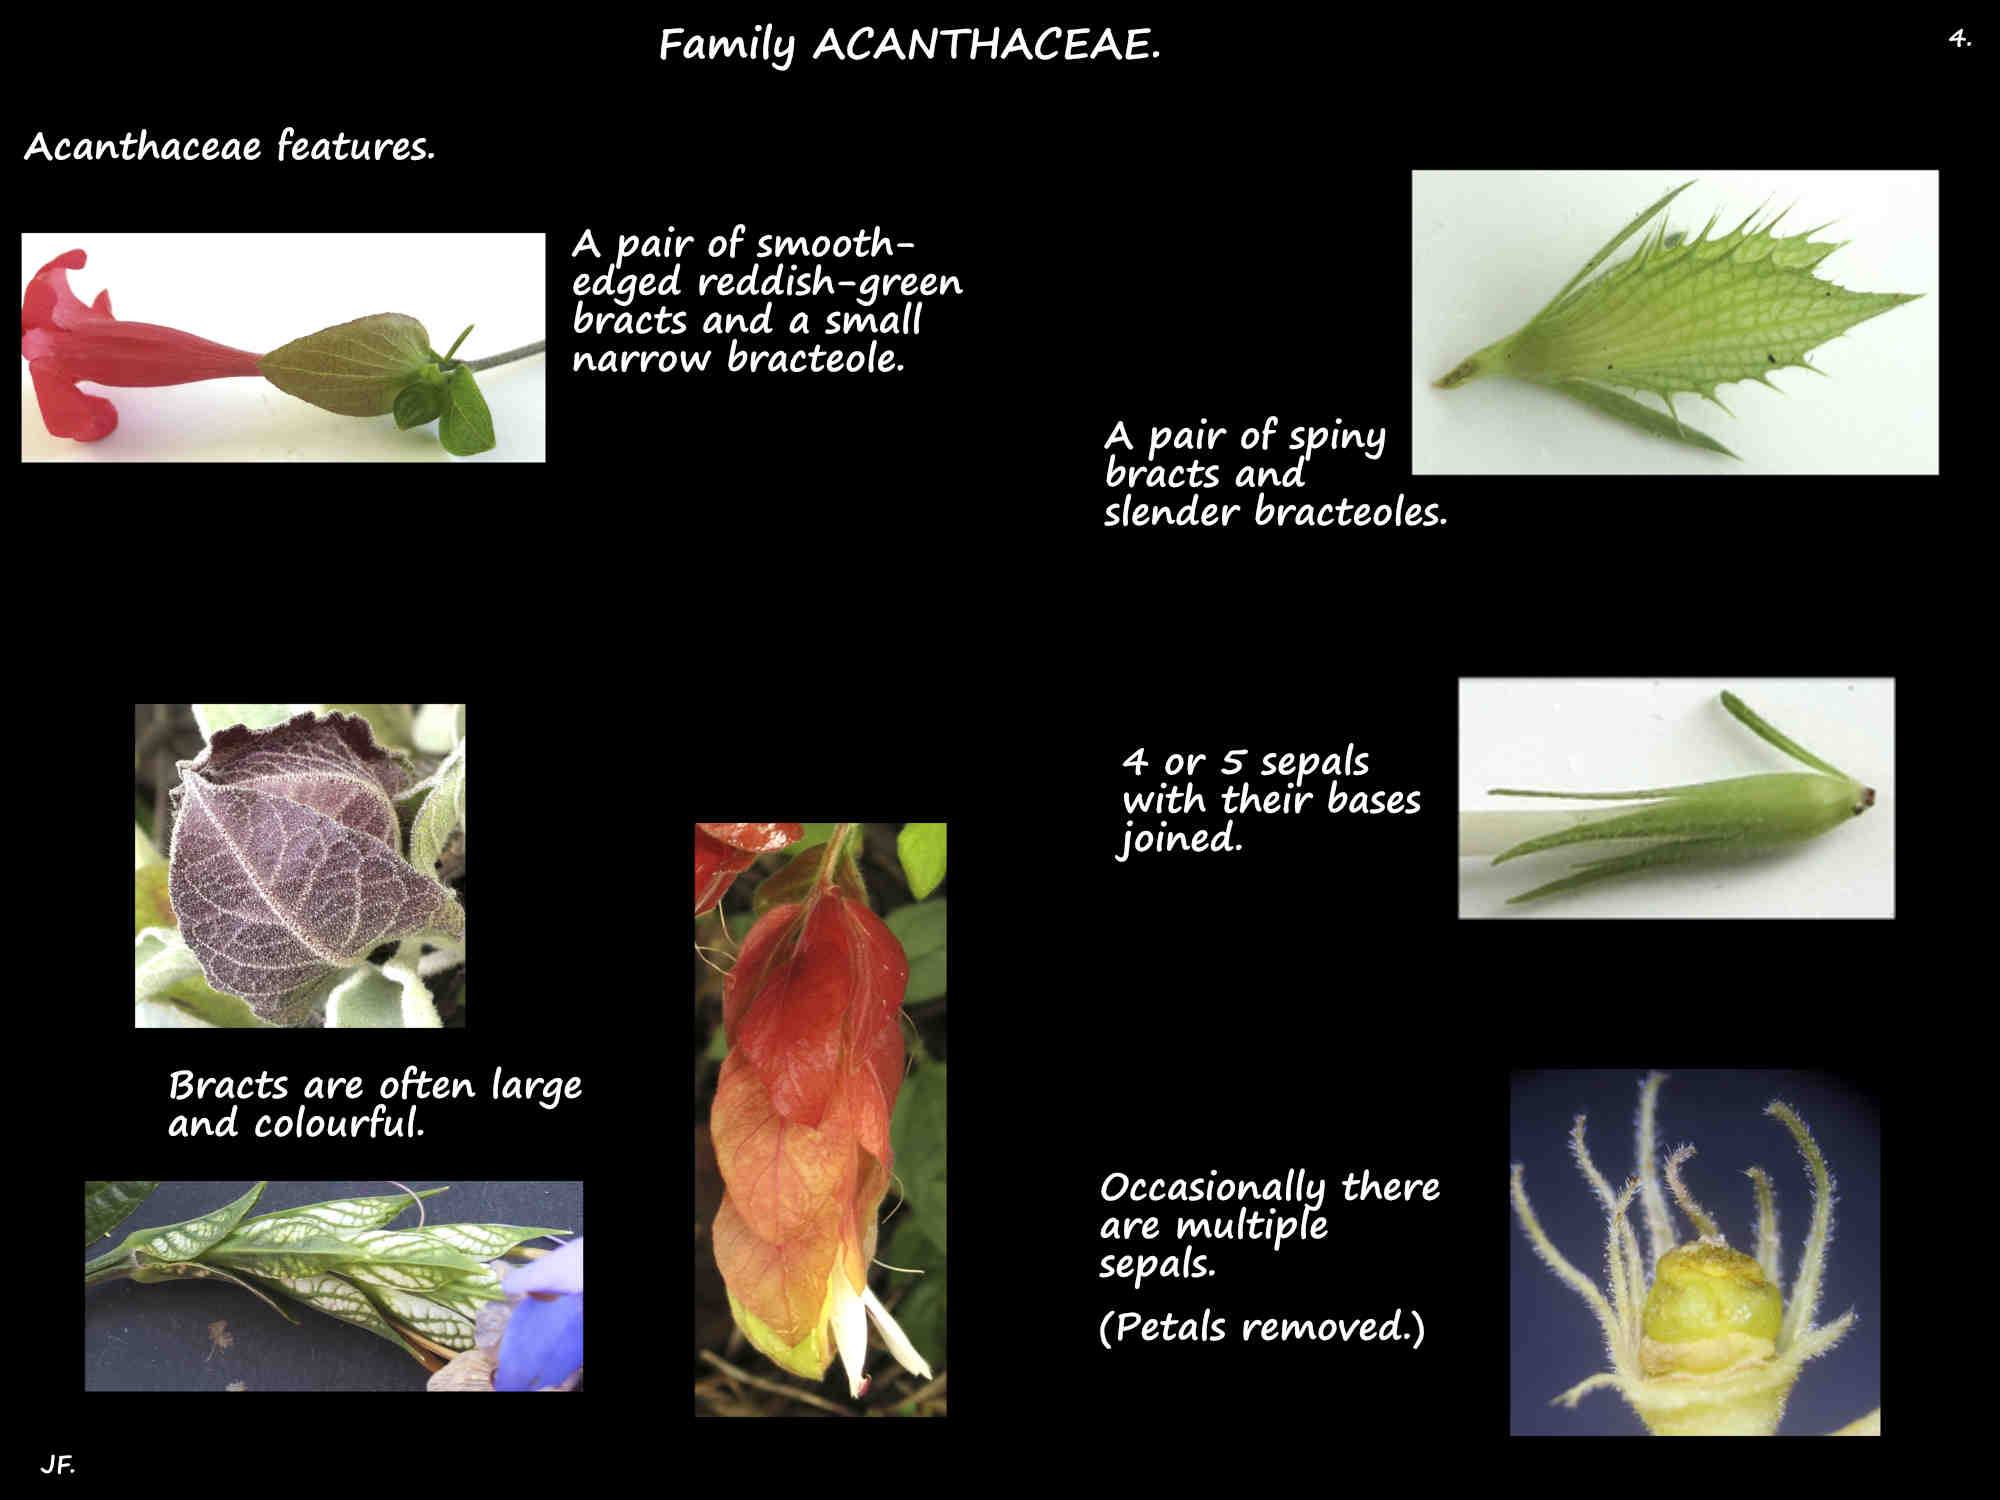 4 Acanthaceae bracts & sepals